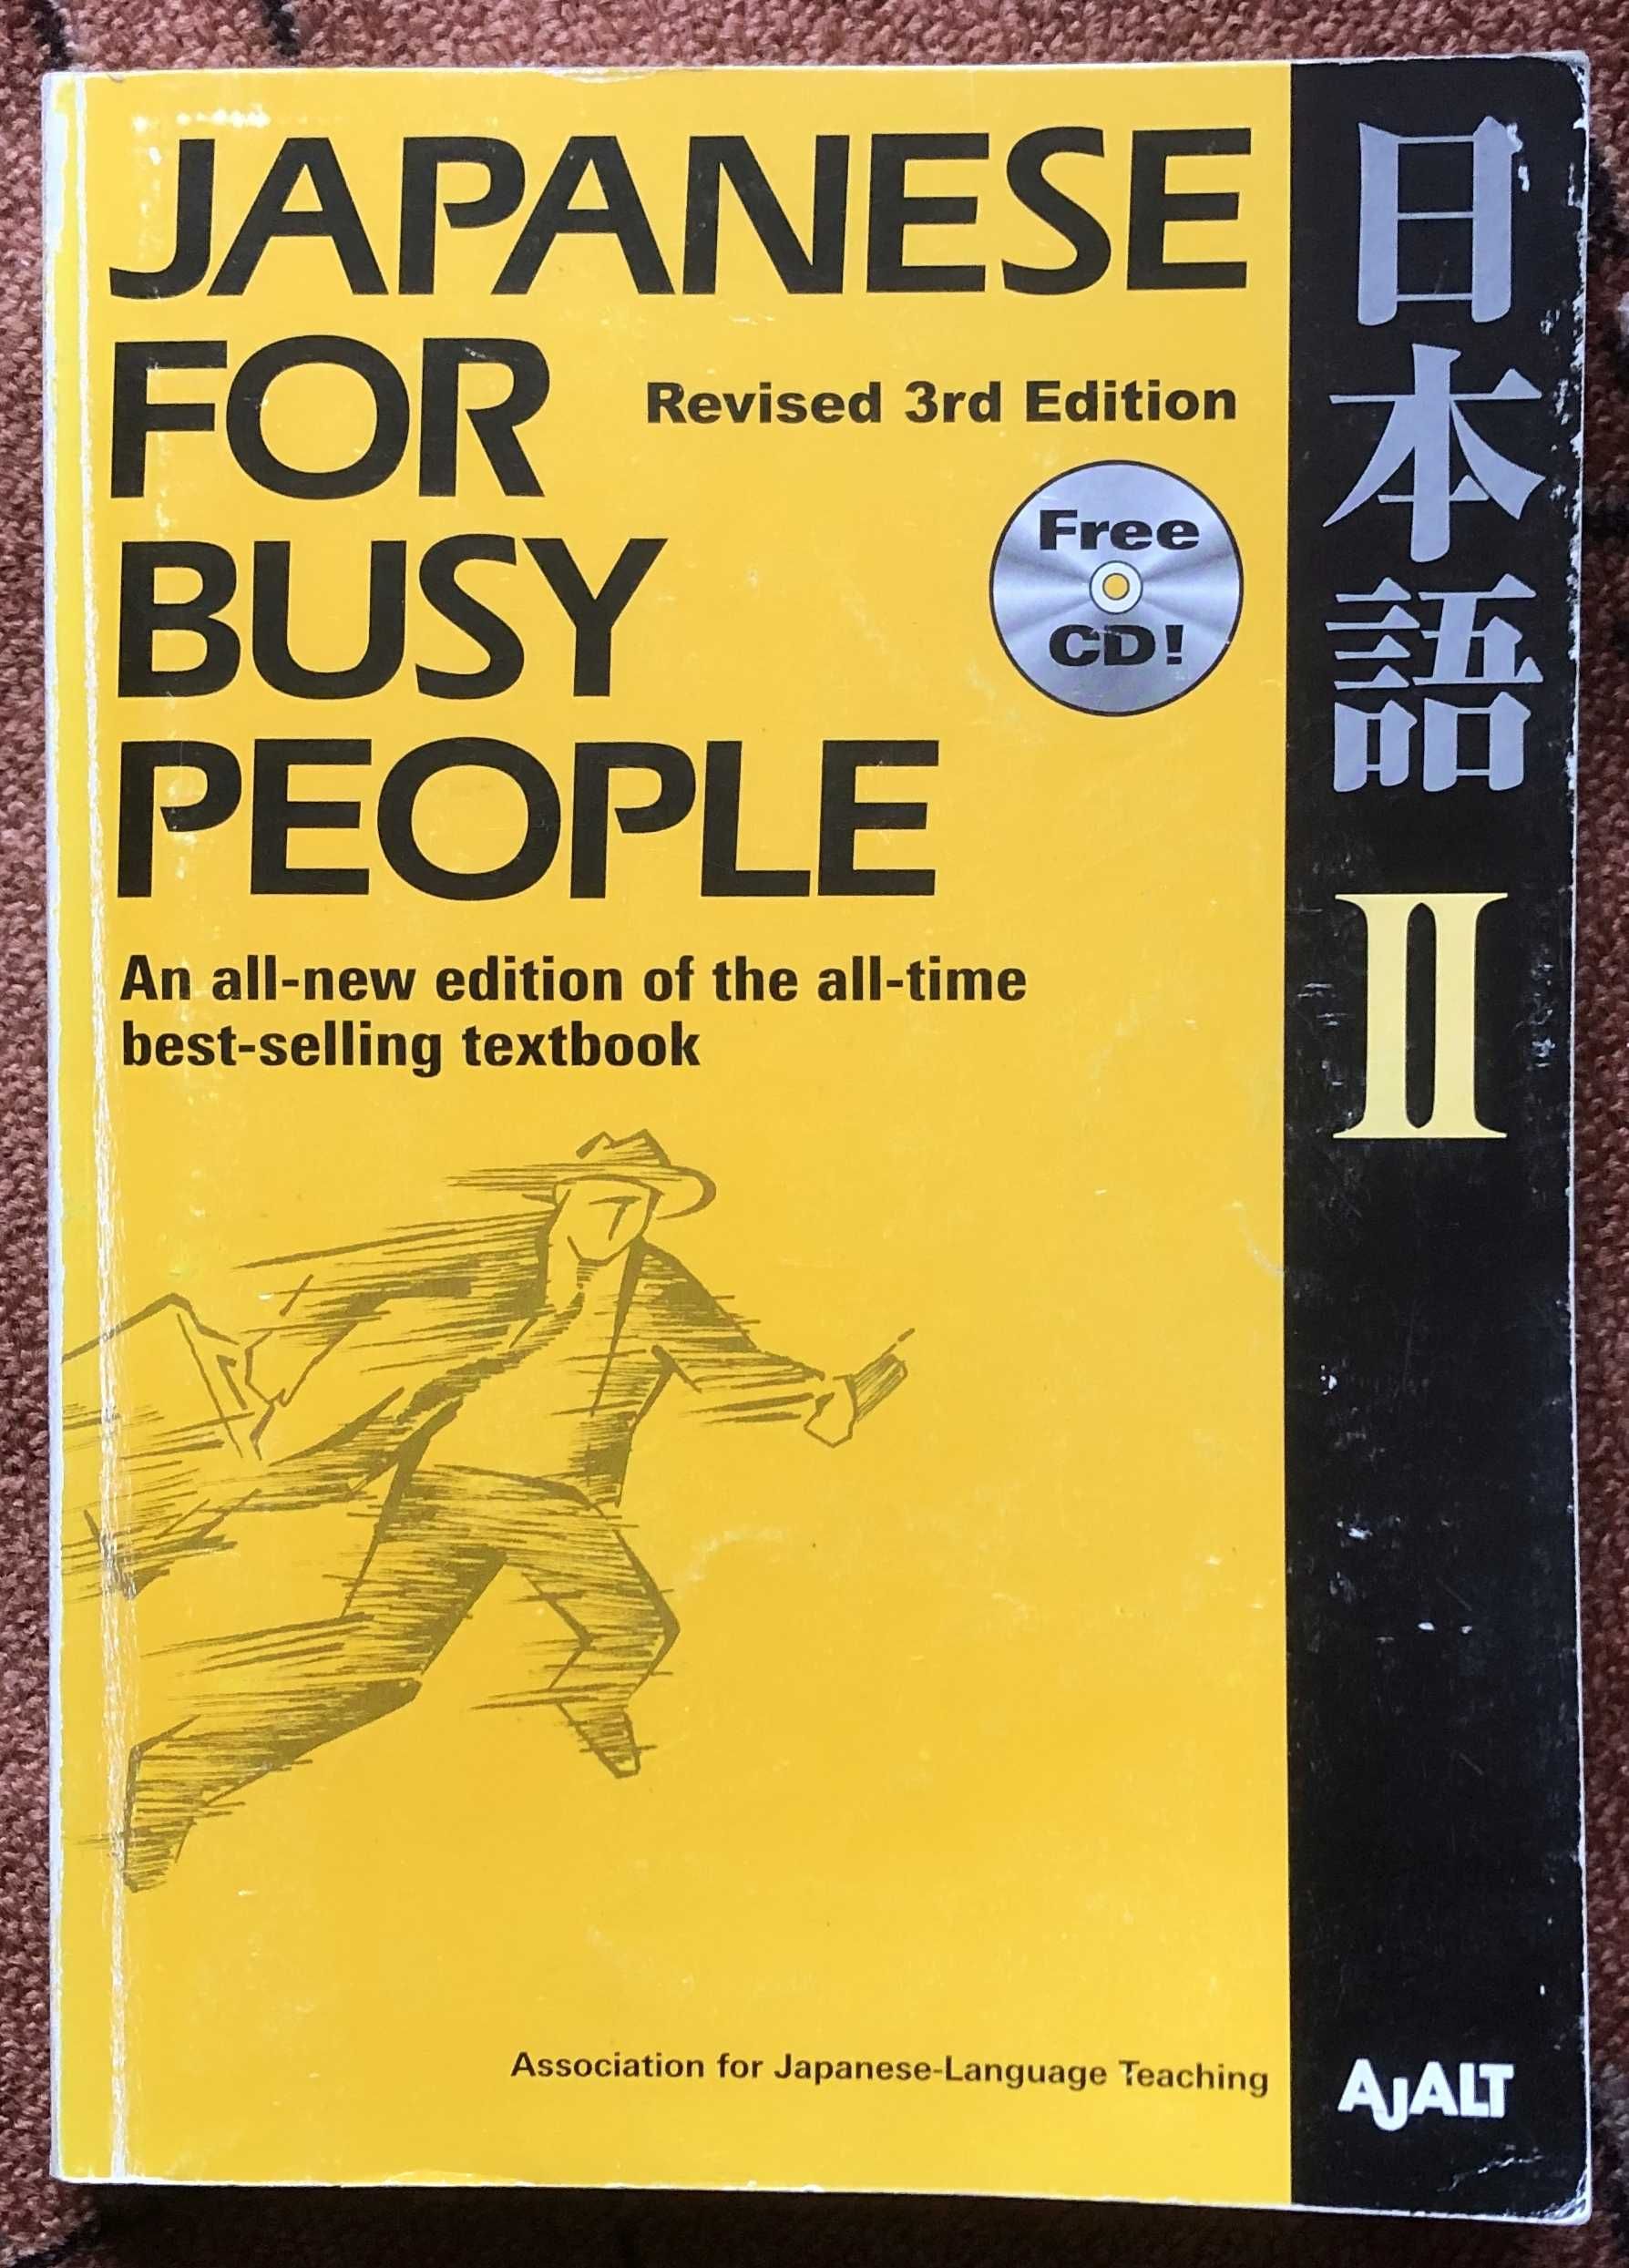 Japanese for busy people II